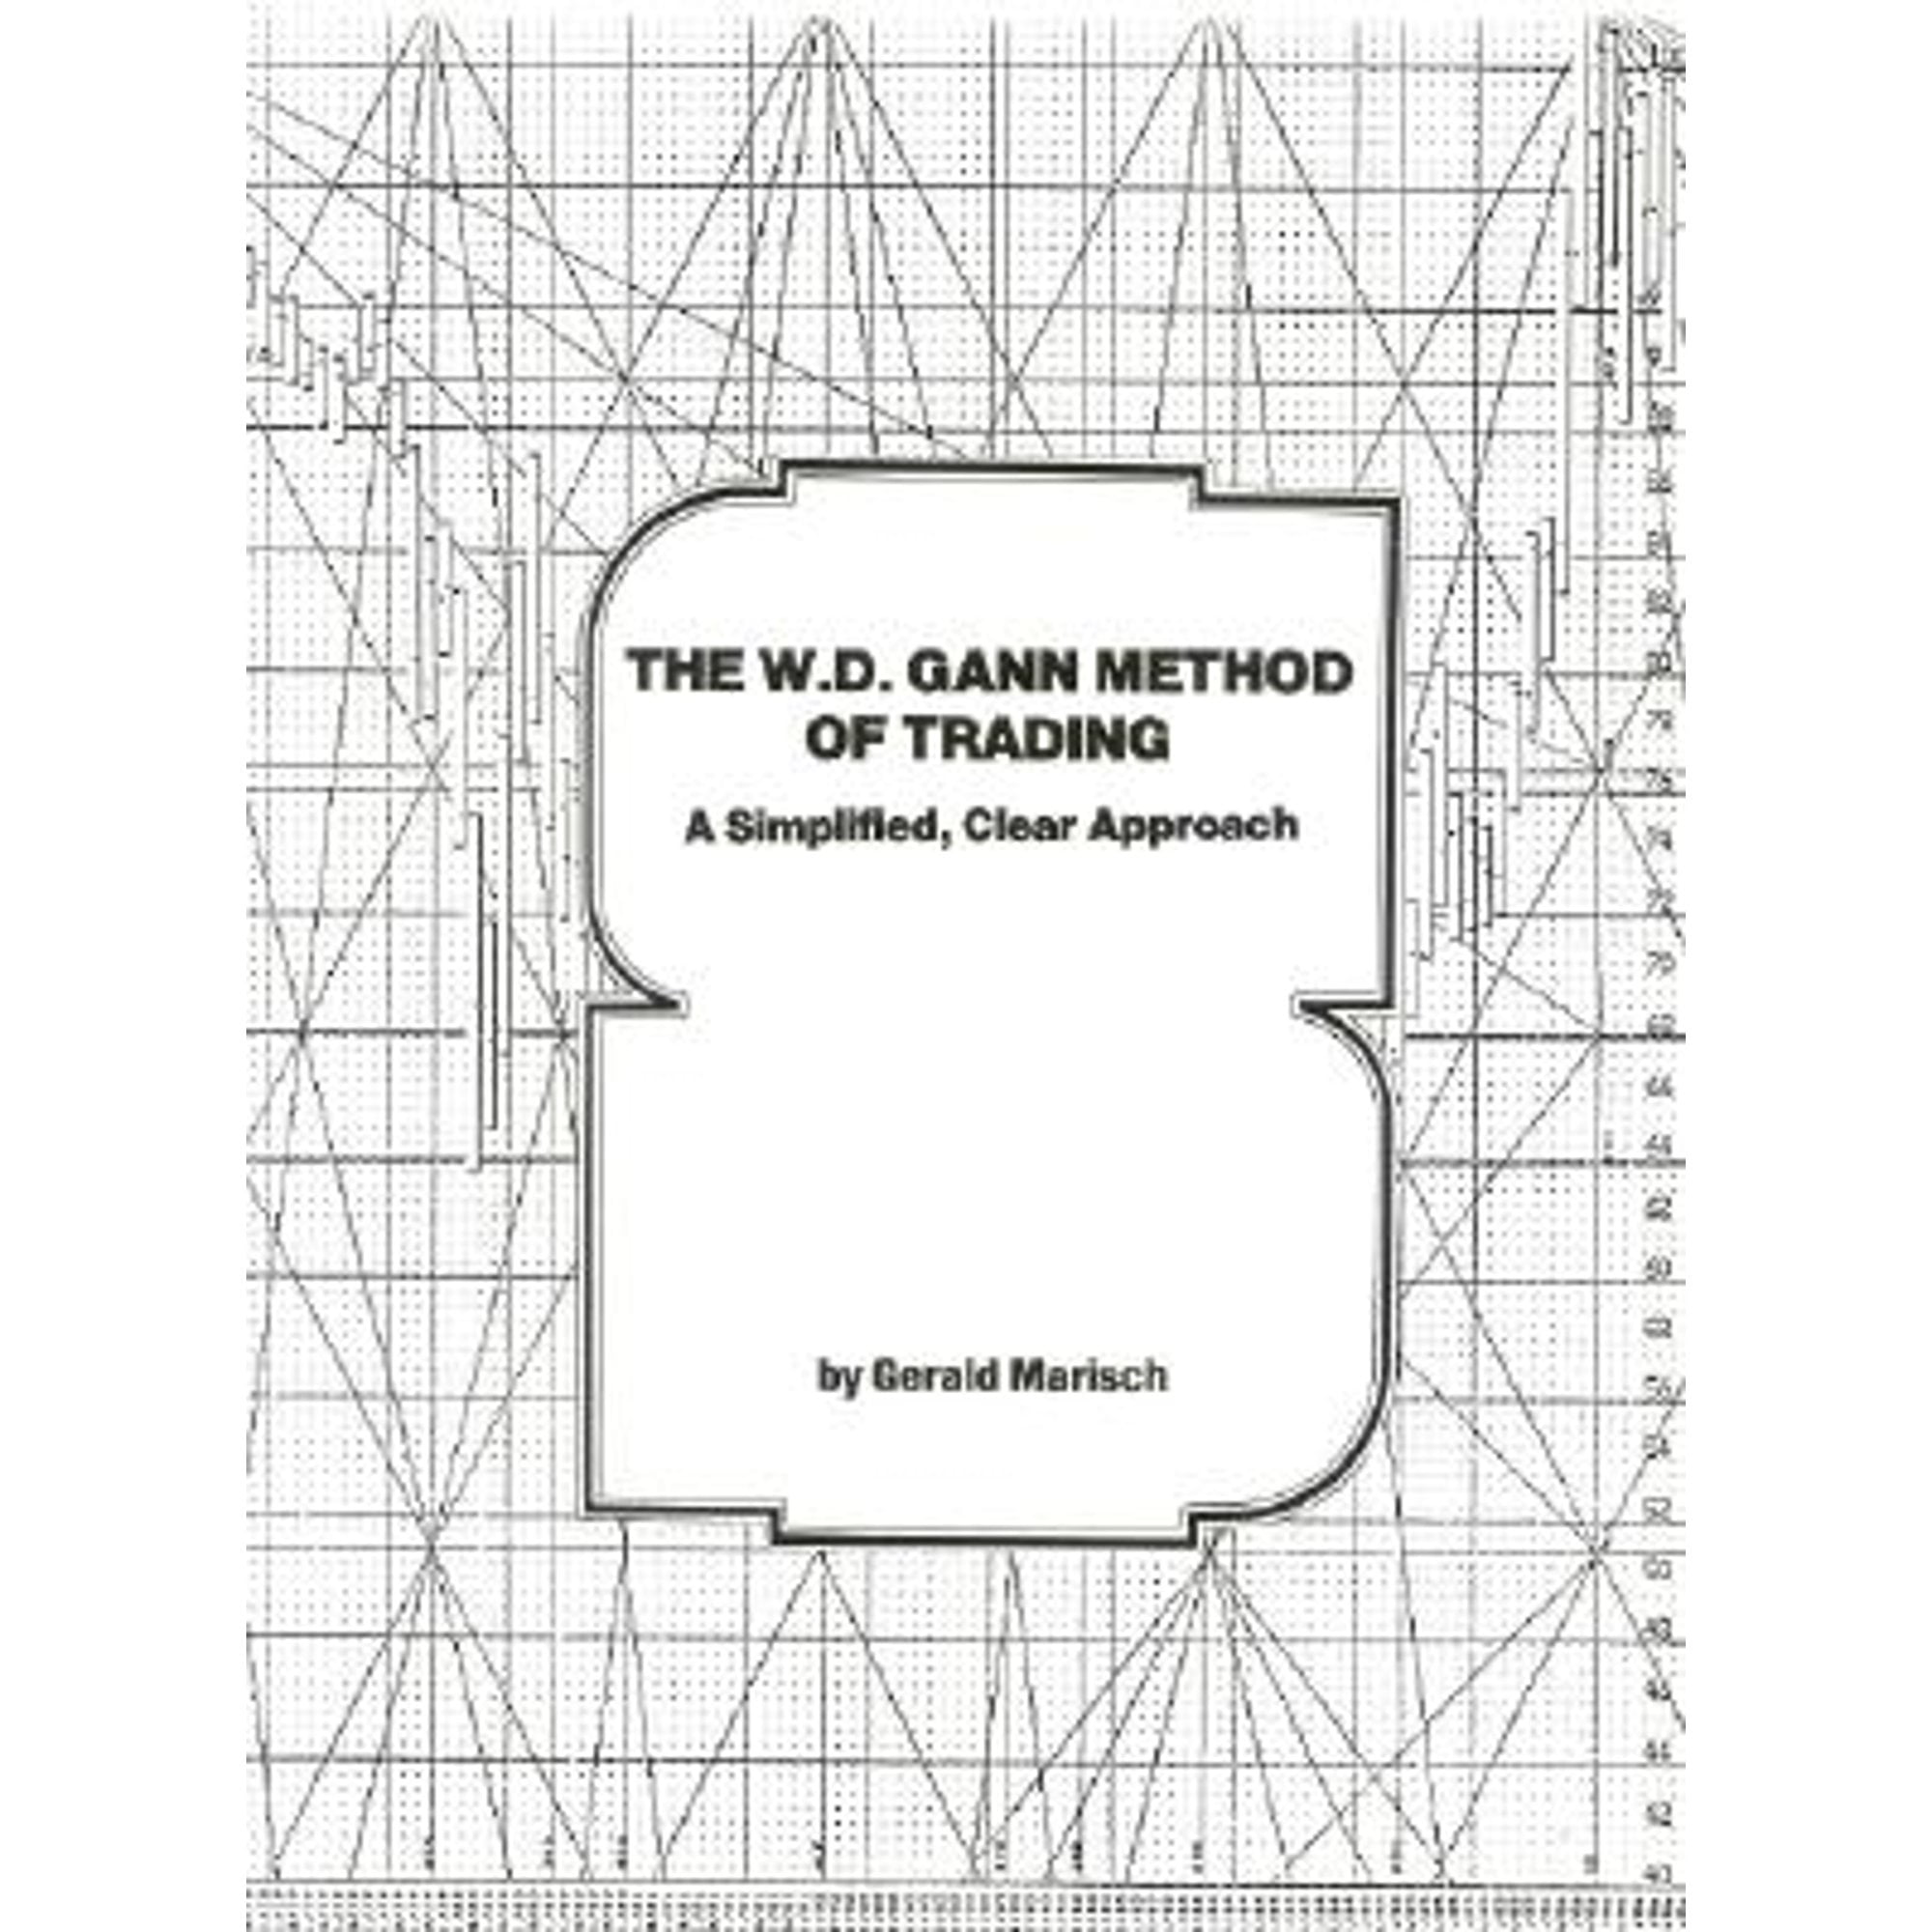 Pre-Owned The W.D. Gann Method of Trading: A Simplified, Clear Approach (Hardcover 9780930233426) by Gerald Marisch